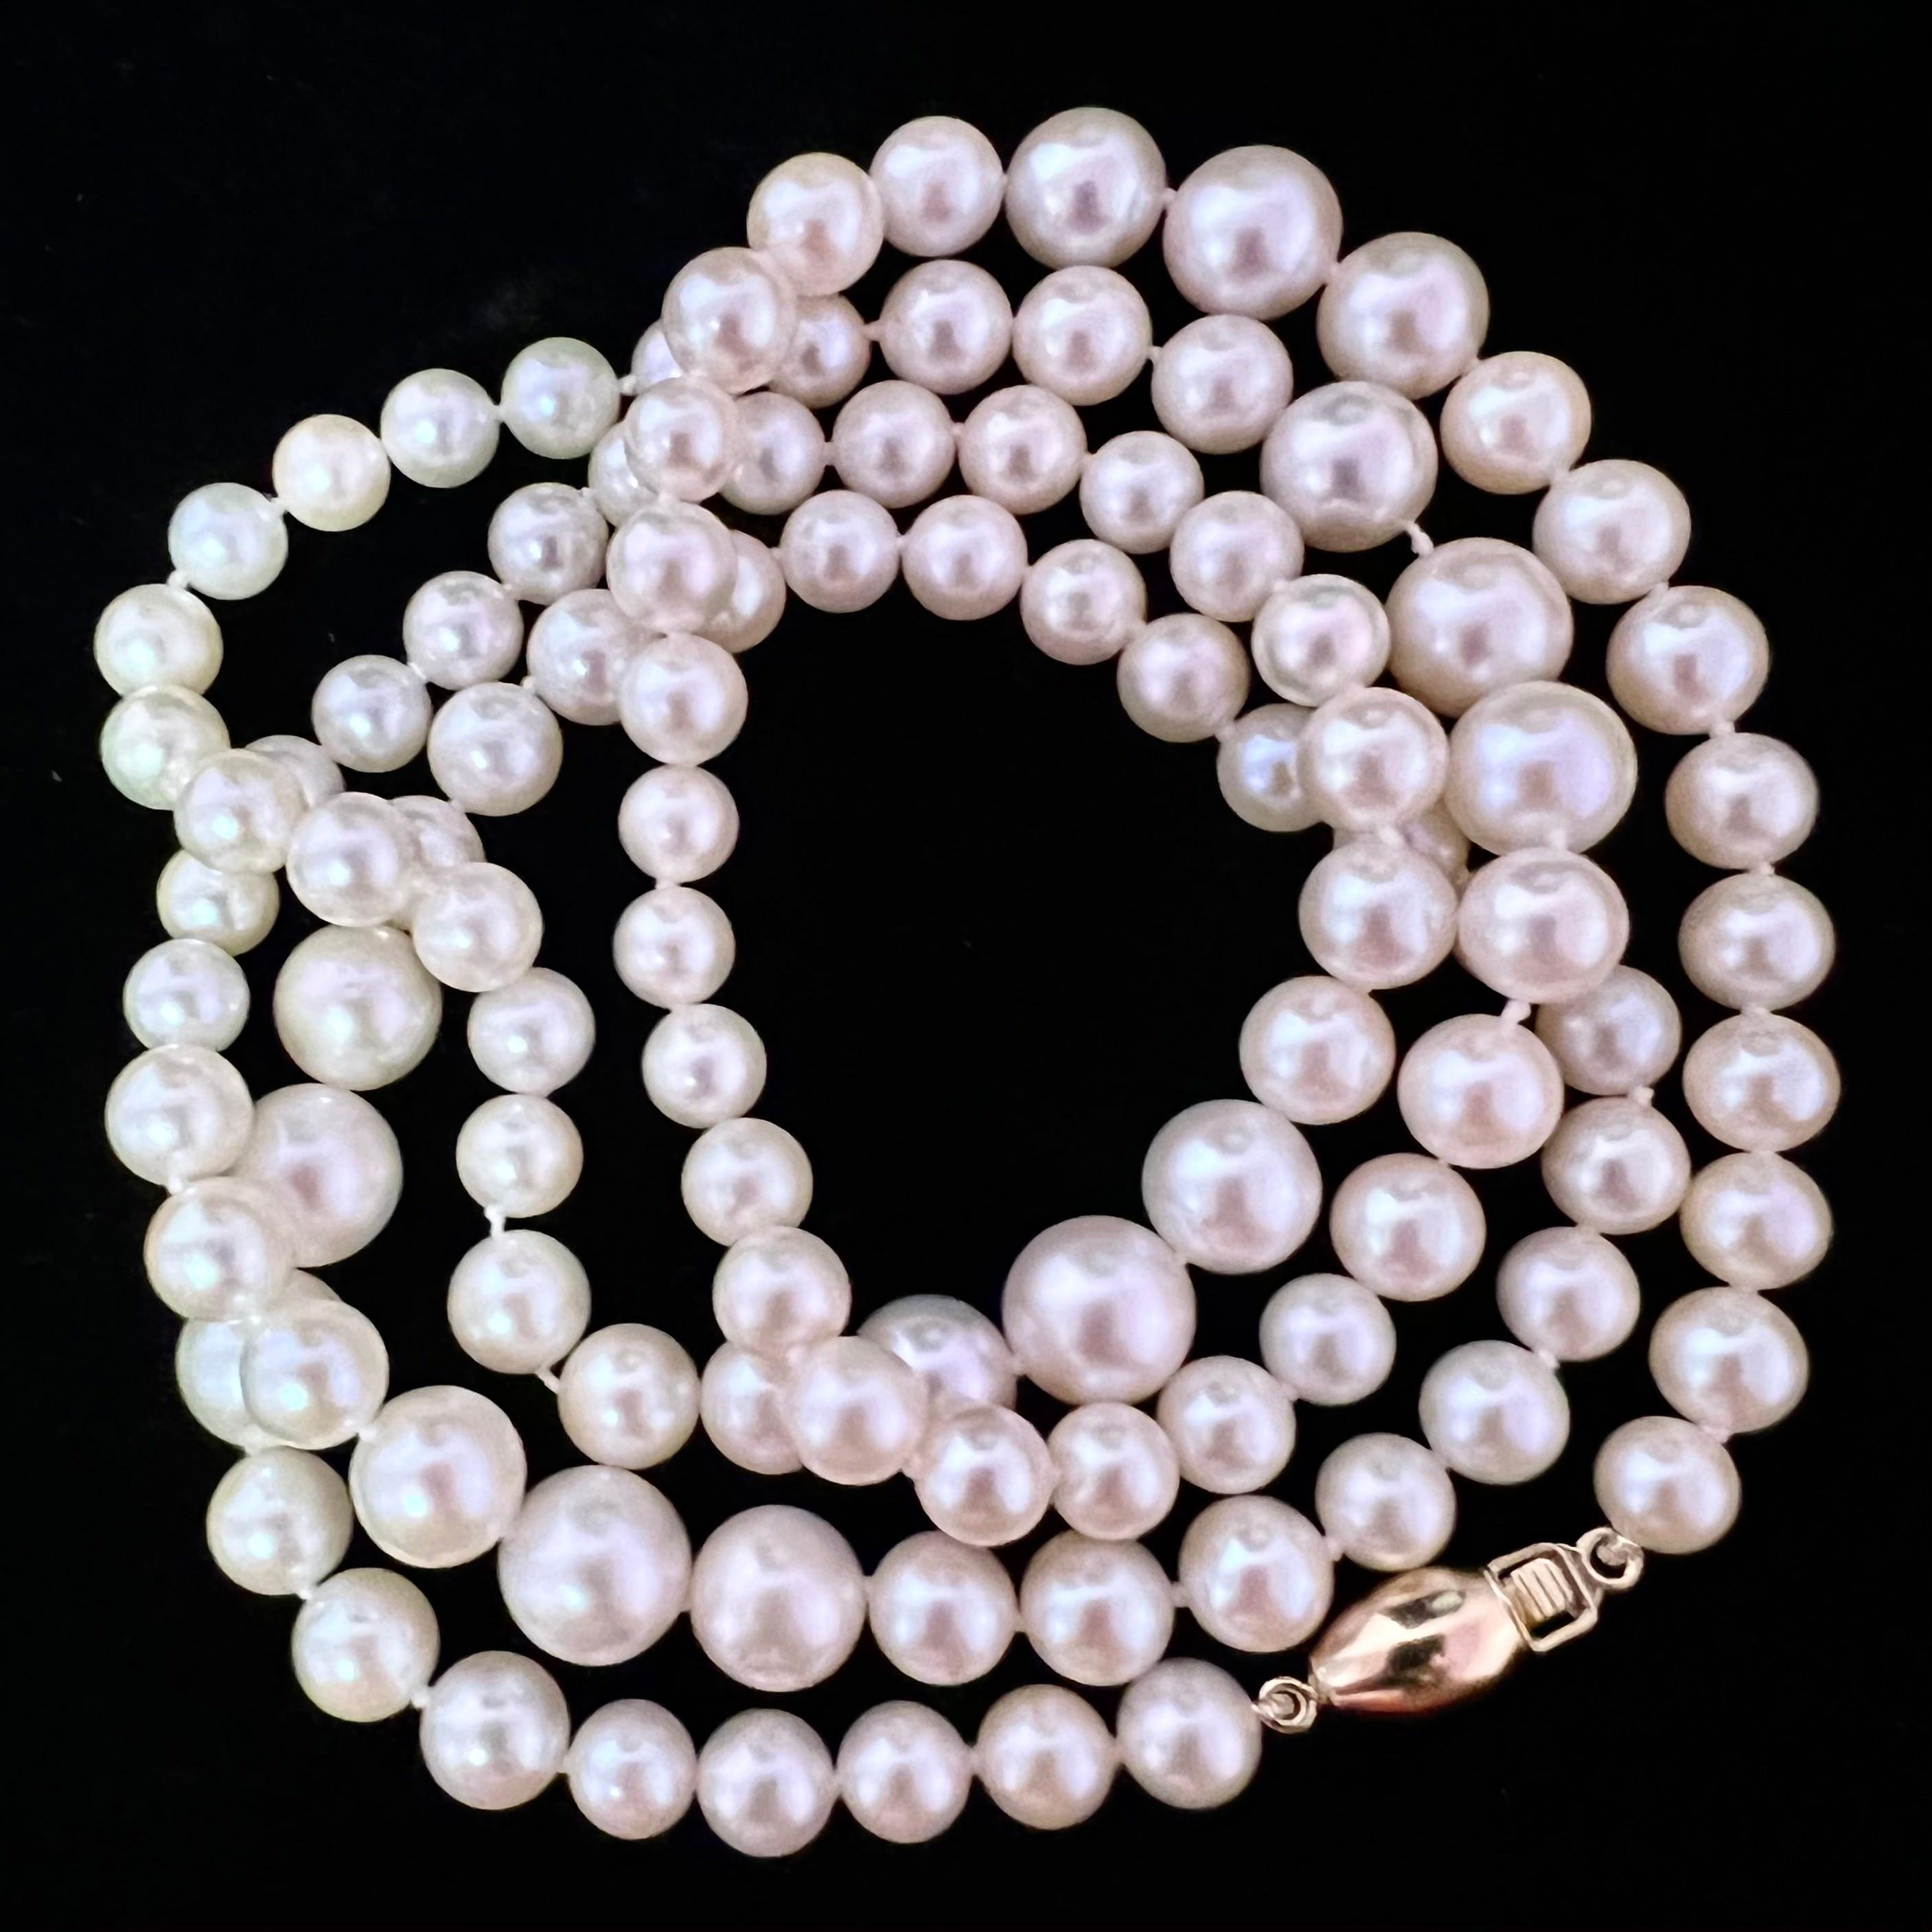 8.5 mm pearl necklace